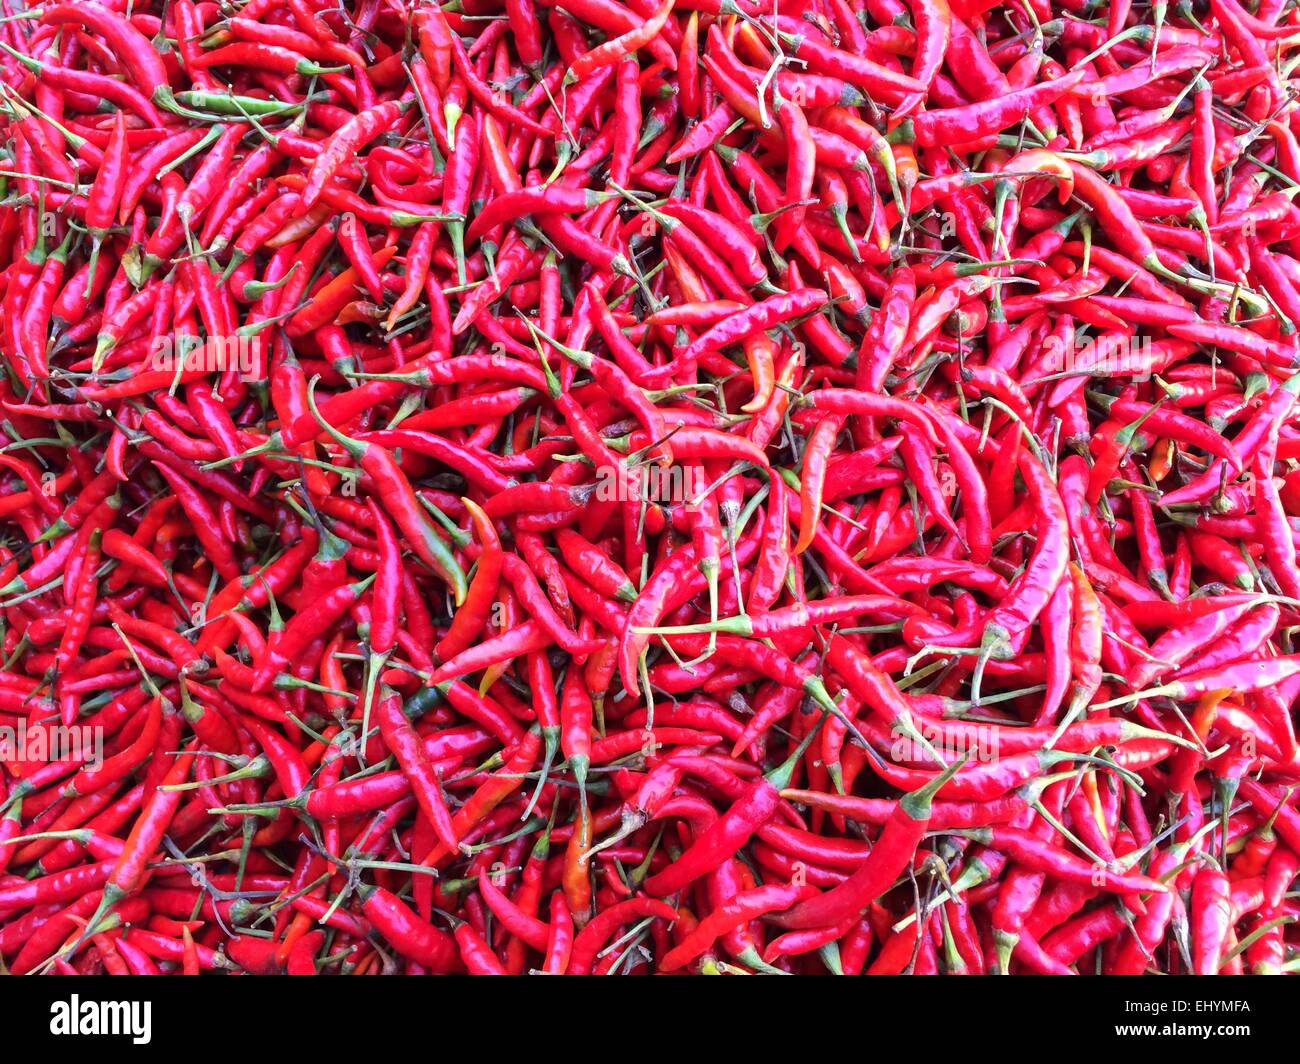 Close-up of Red chillis Stock Photo